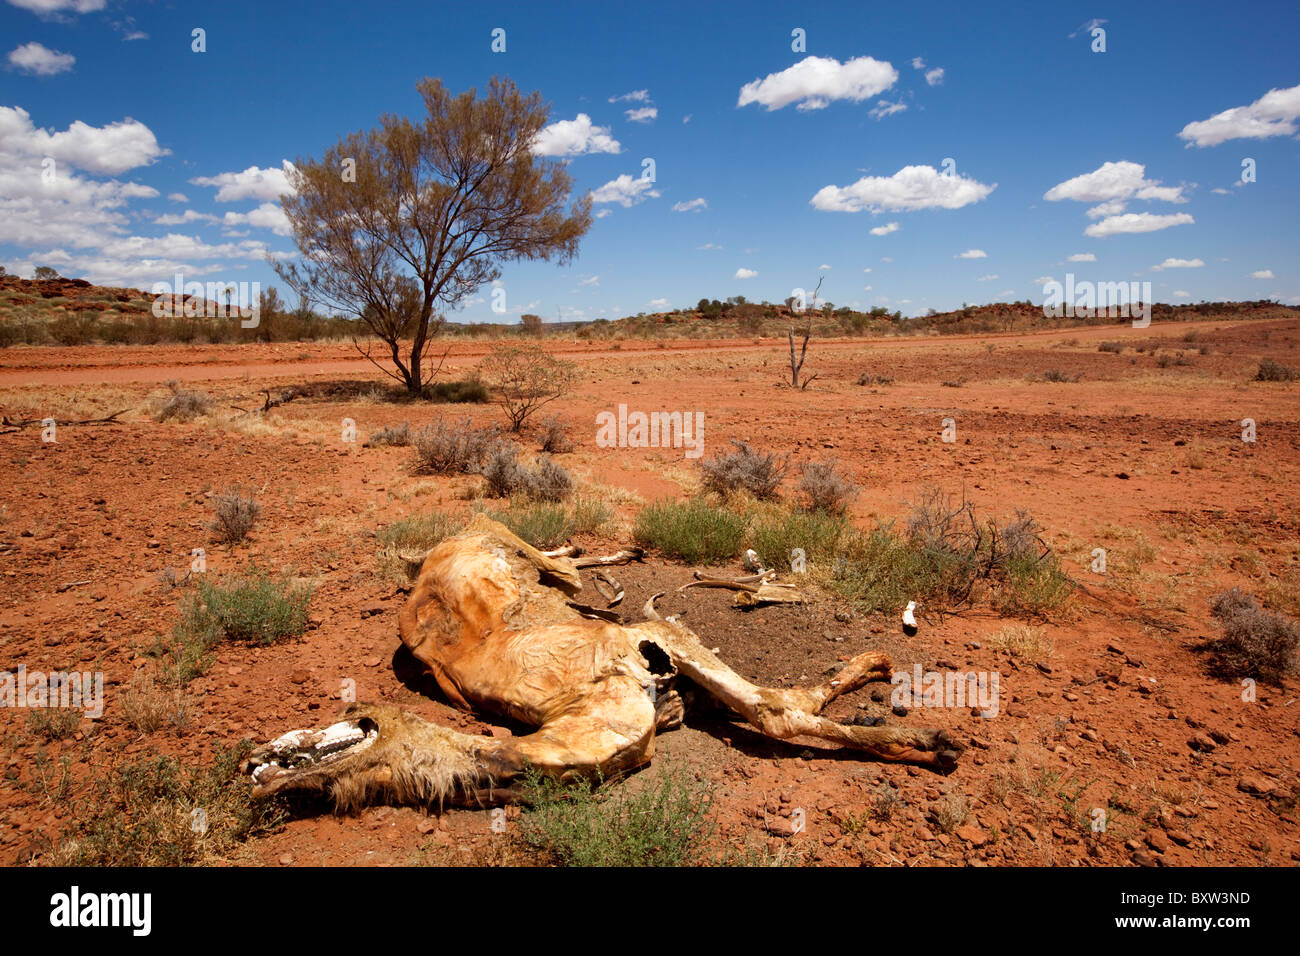 Australia, Northern Territory, Sun-bleached skeletal remains of dead camel in outback desert in midday summer sun Stock Photo